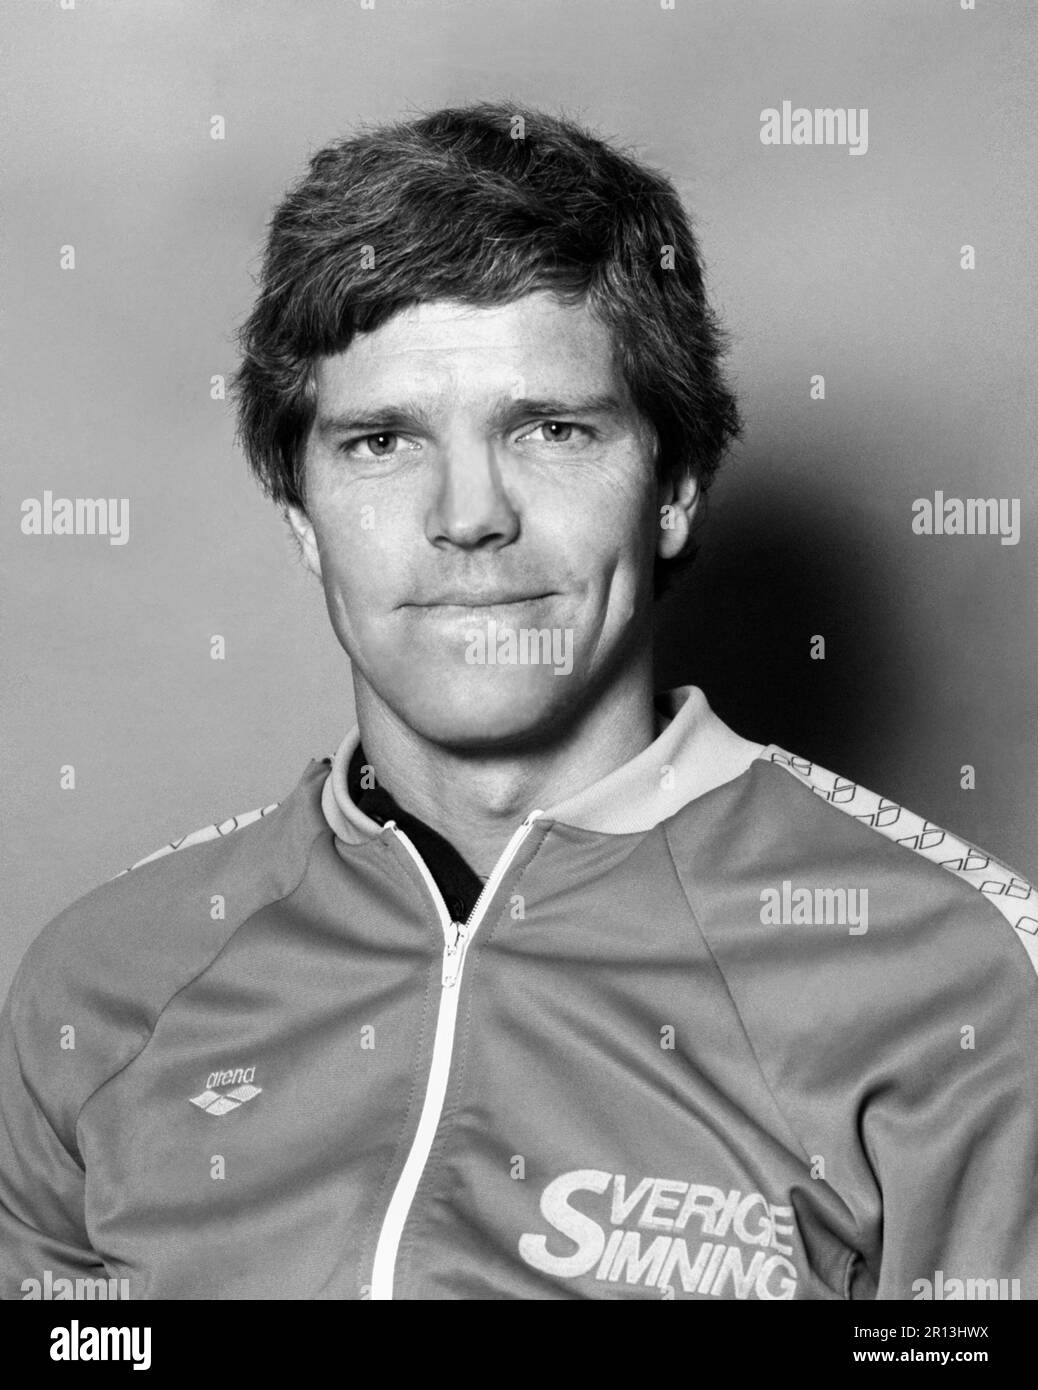 SVEN VON HOLST Swedish member of the International Olympic committe and of the Swedish Swimming association Stock Photo